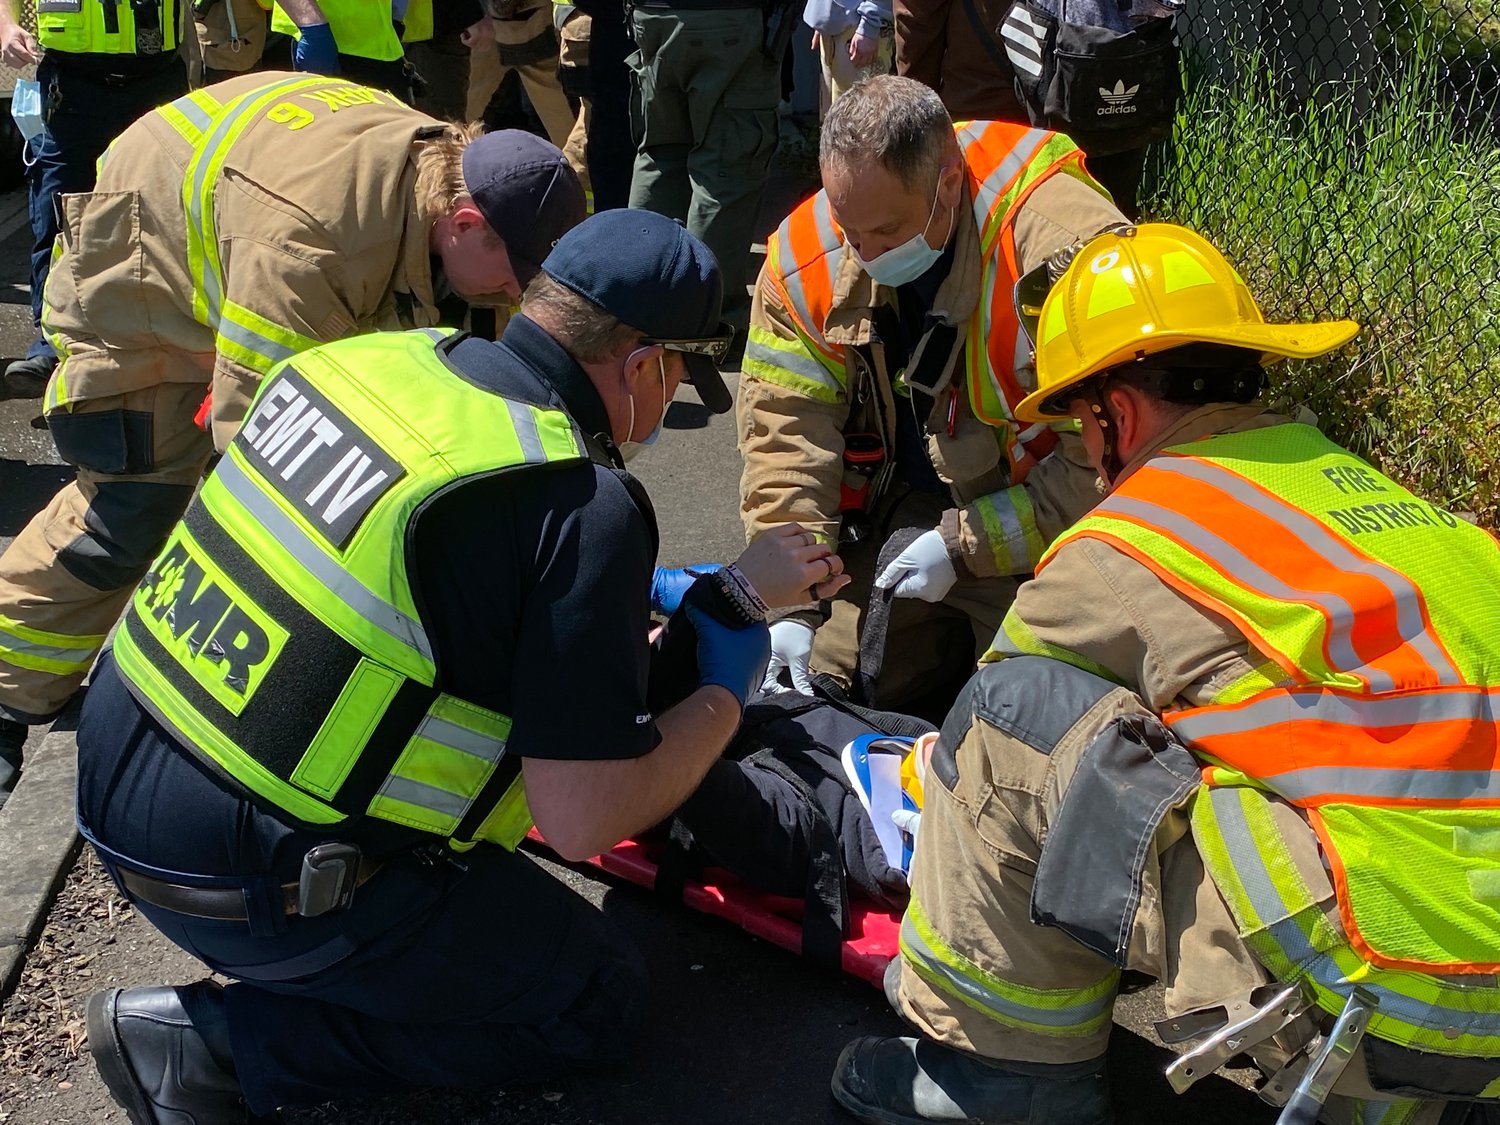 An SUV carrying 10 teenagers from Prairie High School spun off the road and rolled multiple times near 117th Street in Salmon Creek on May 19.